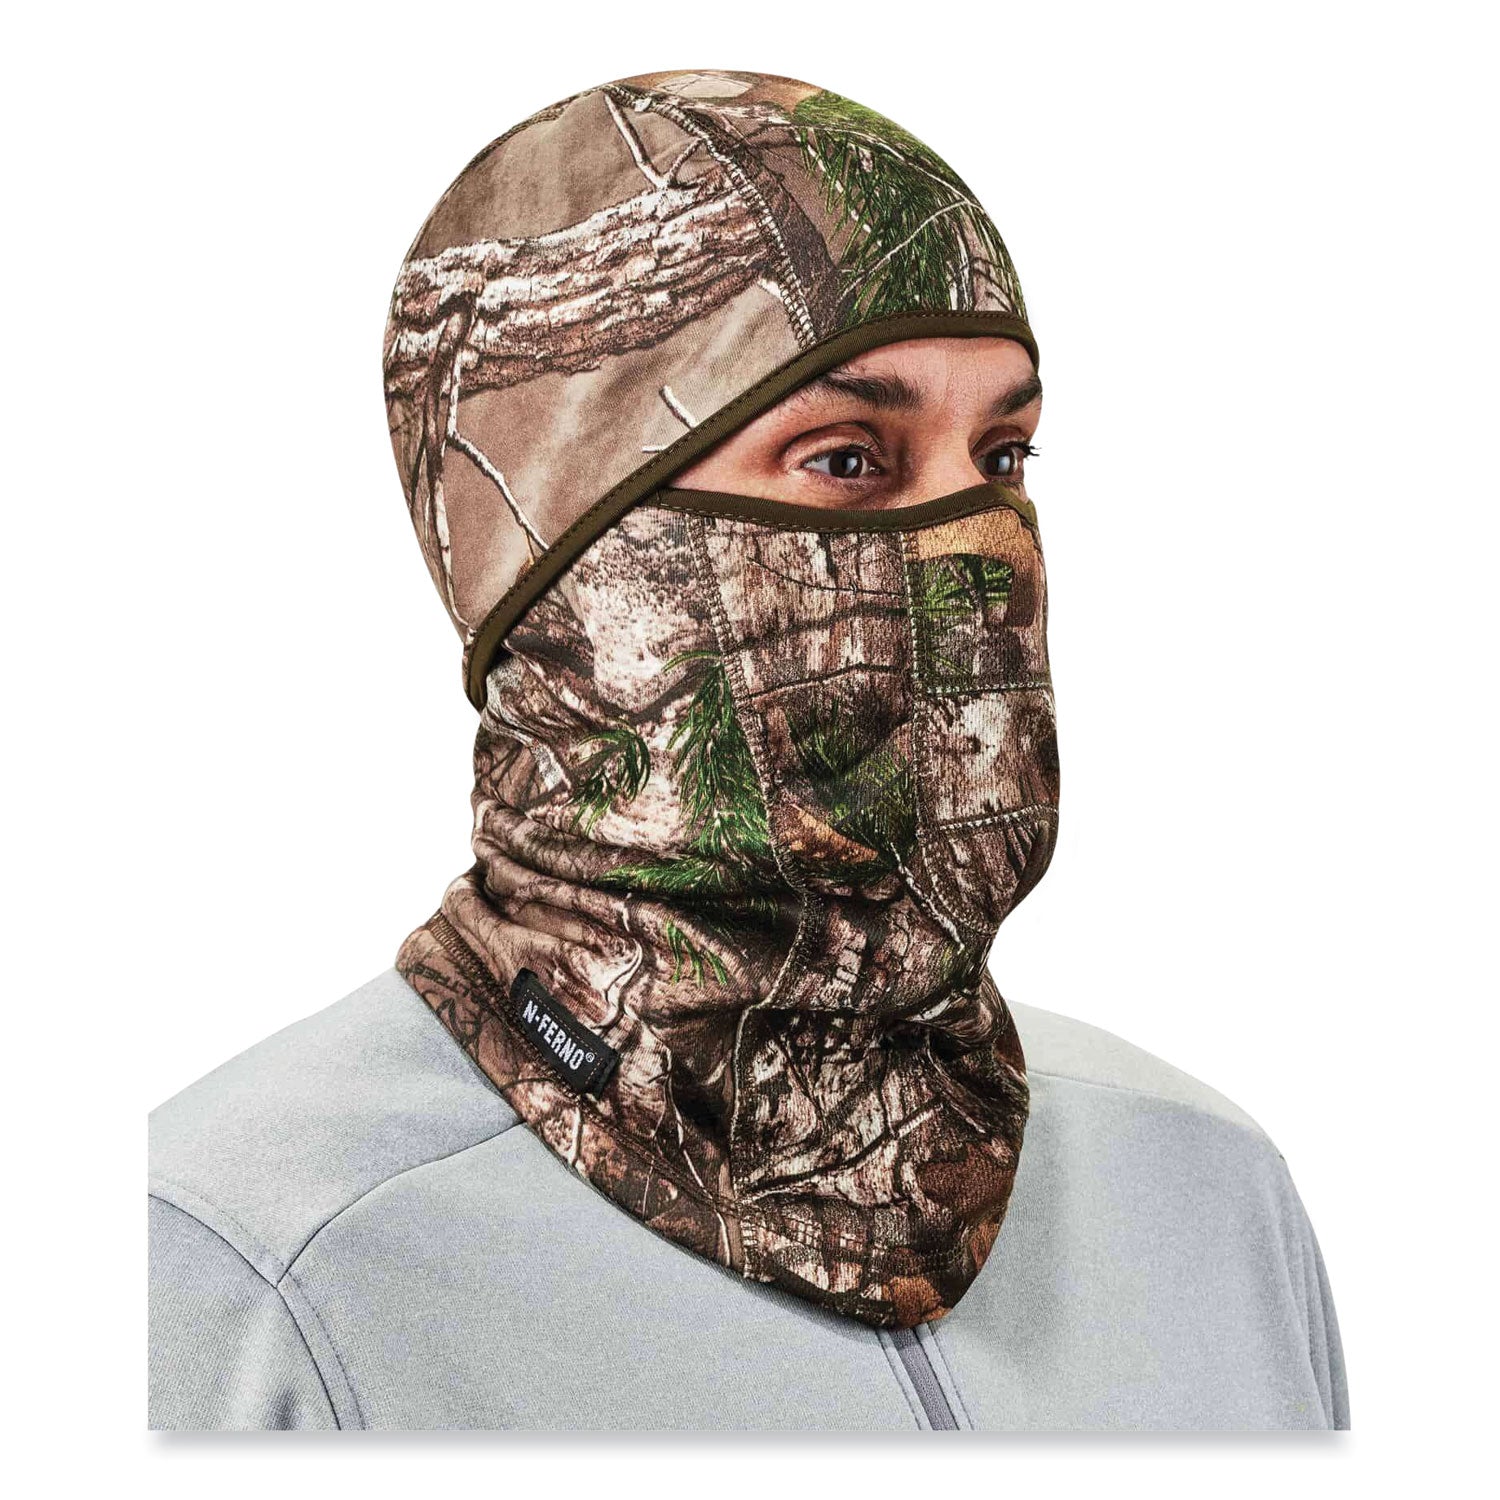 n-ferno-6823-hinged-balaclava-face-mask-fleece-one-size-fits-most-realtree-edge-ships-in-1-3-business-days_ego16833 - 8